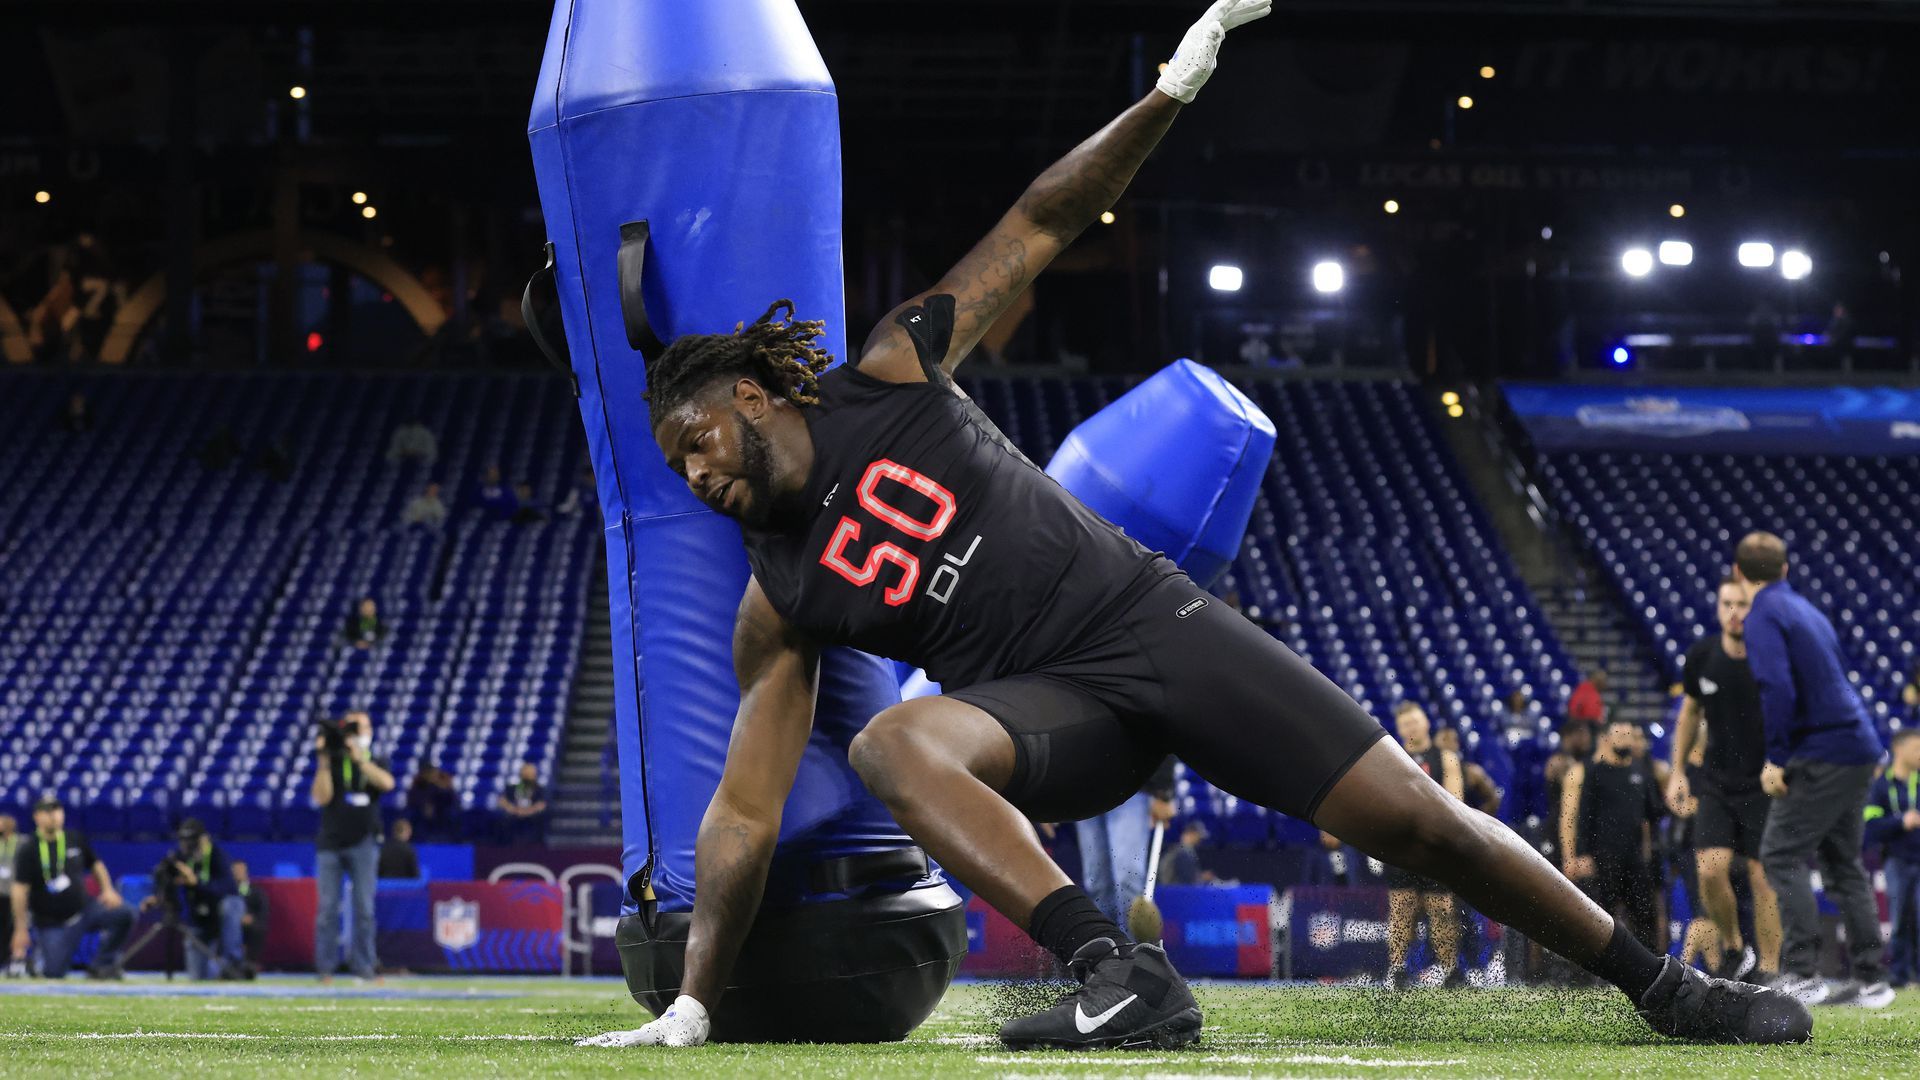 UAB's Alex Wright during a combine drill. Photo: Justin Casterline/Getty Images